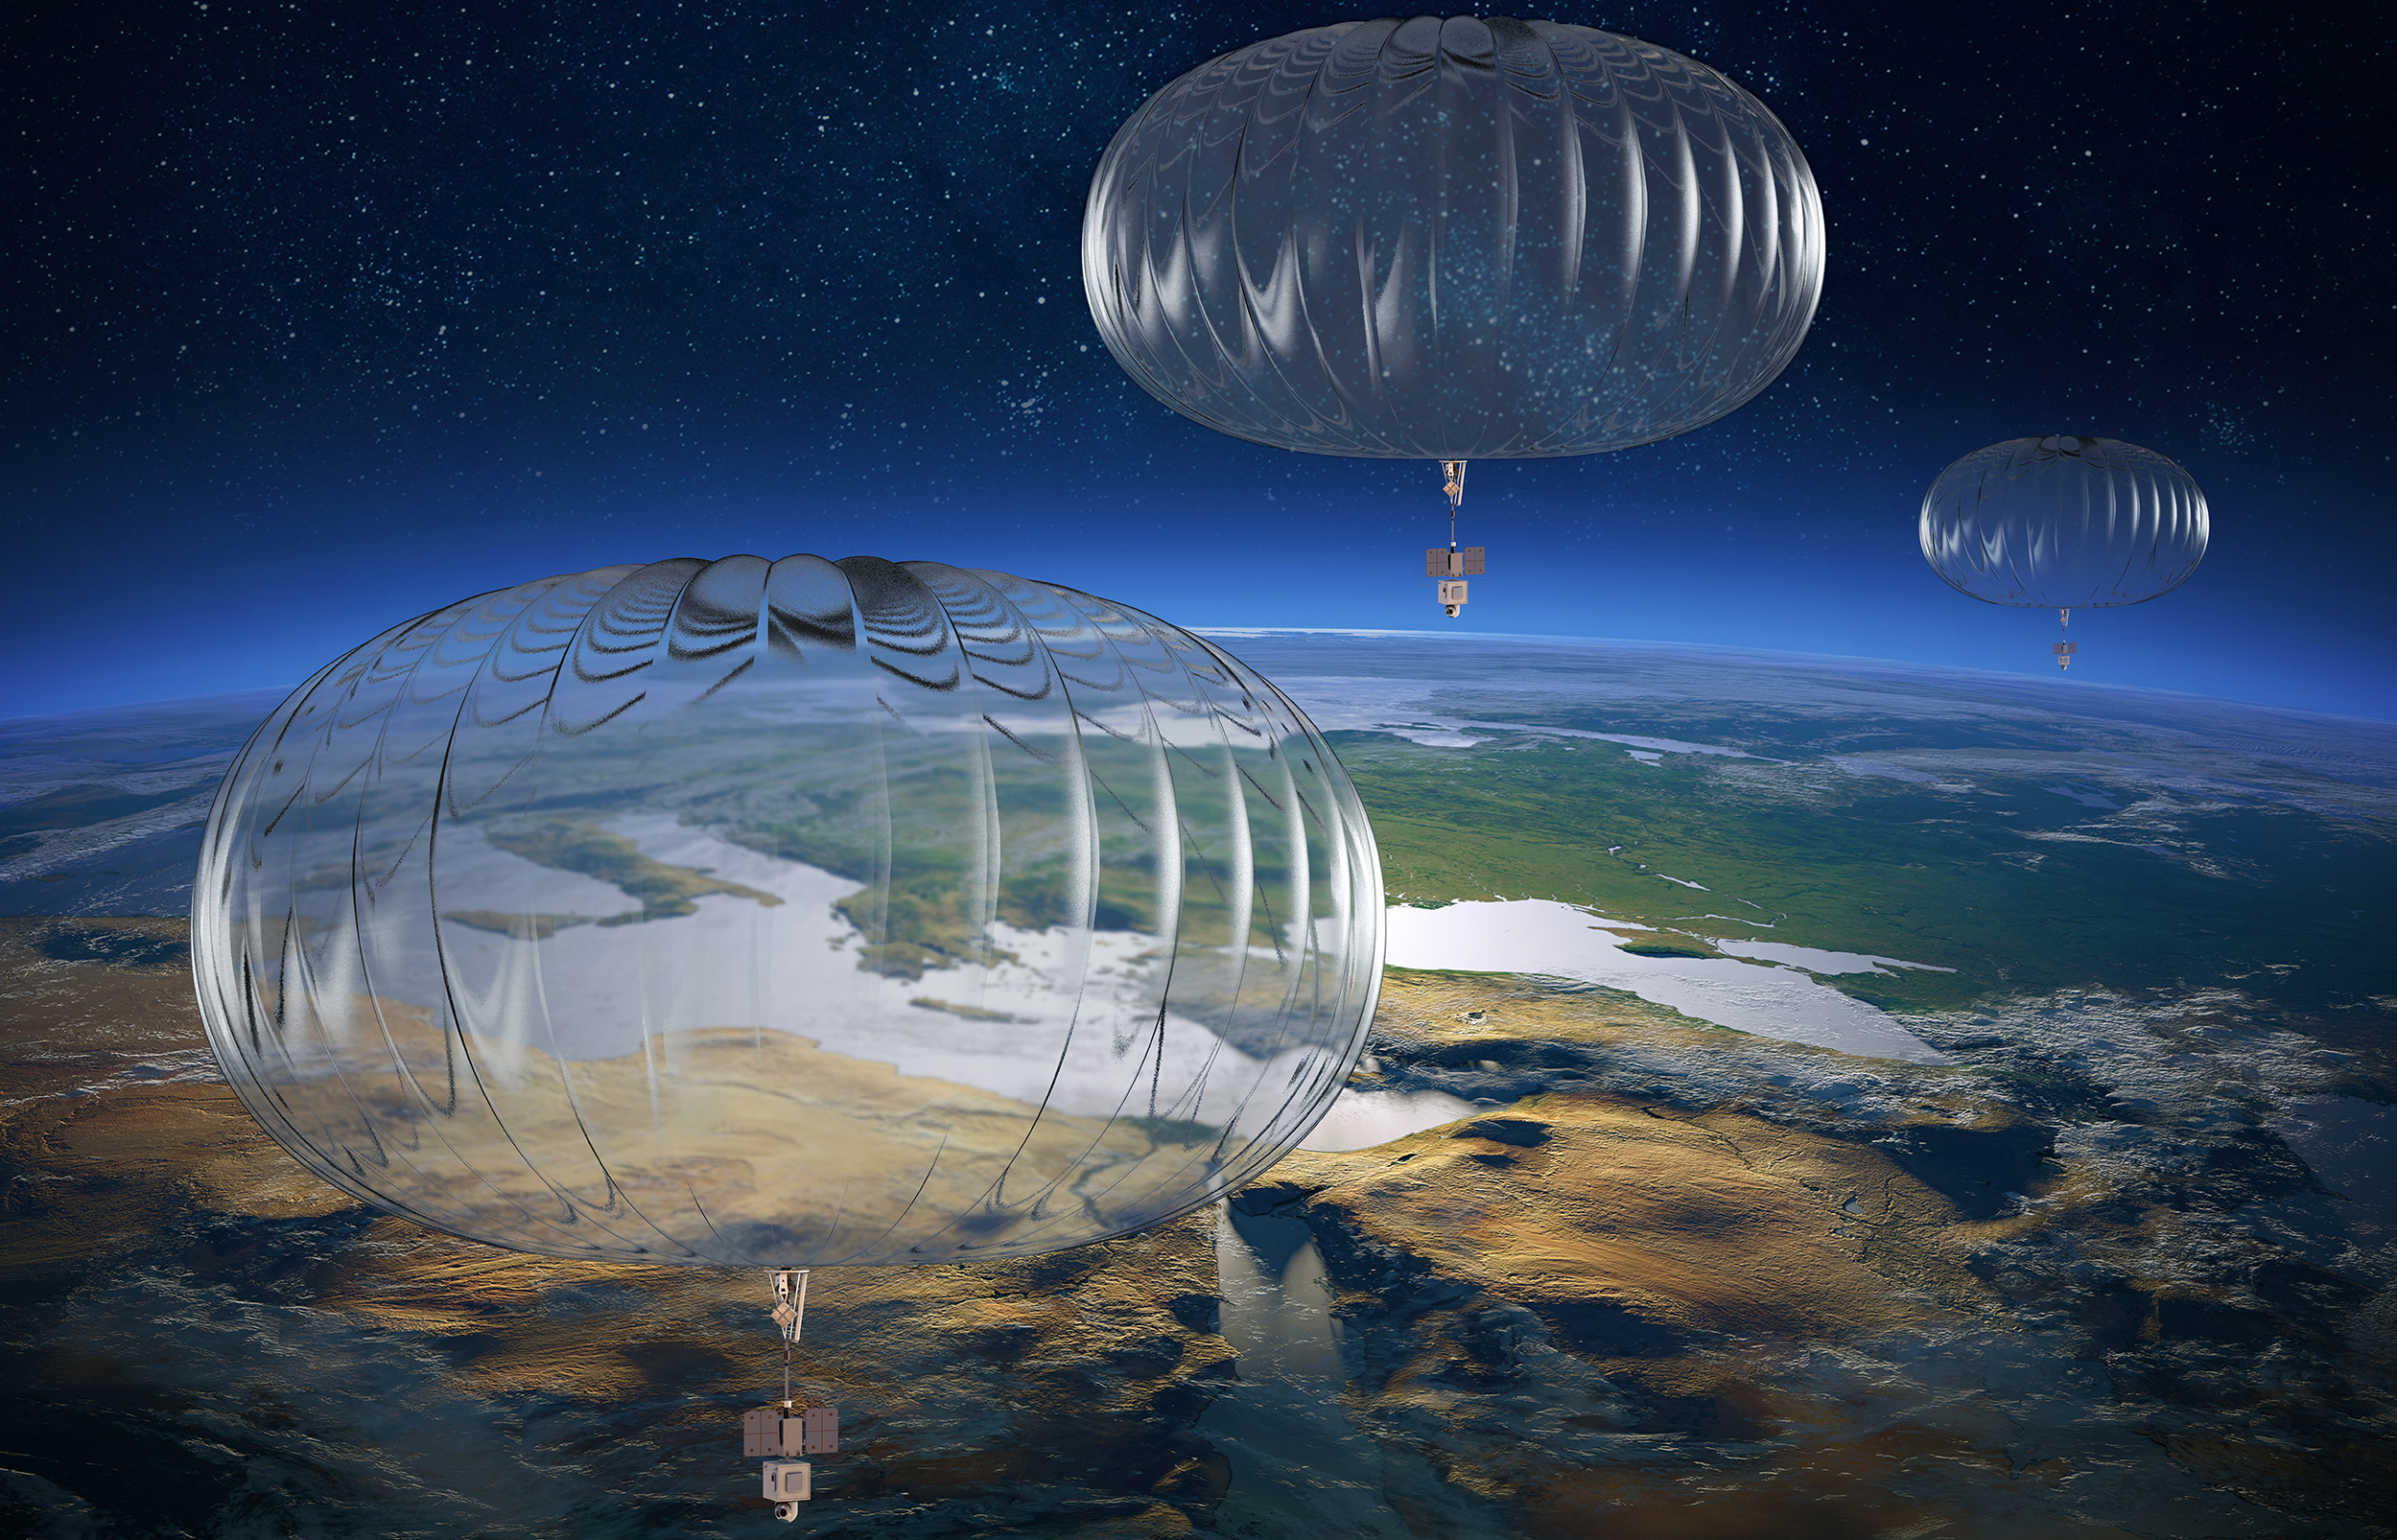 The UK military is elevating its surveillance network with high-altitude balloons